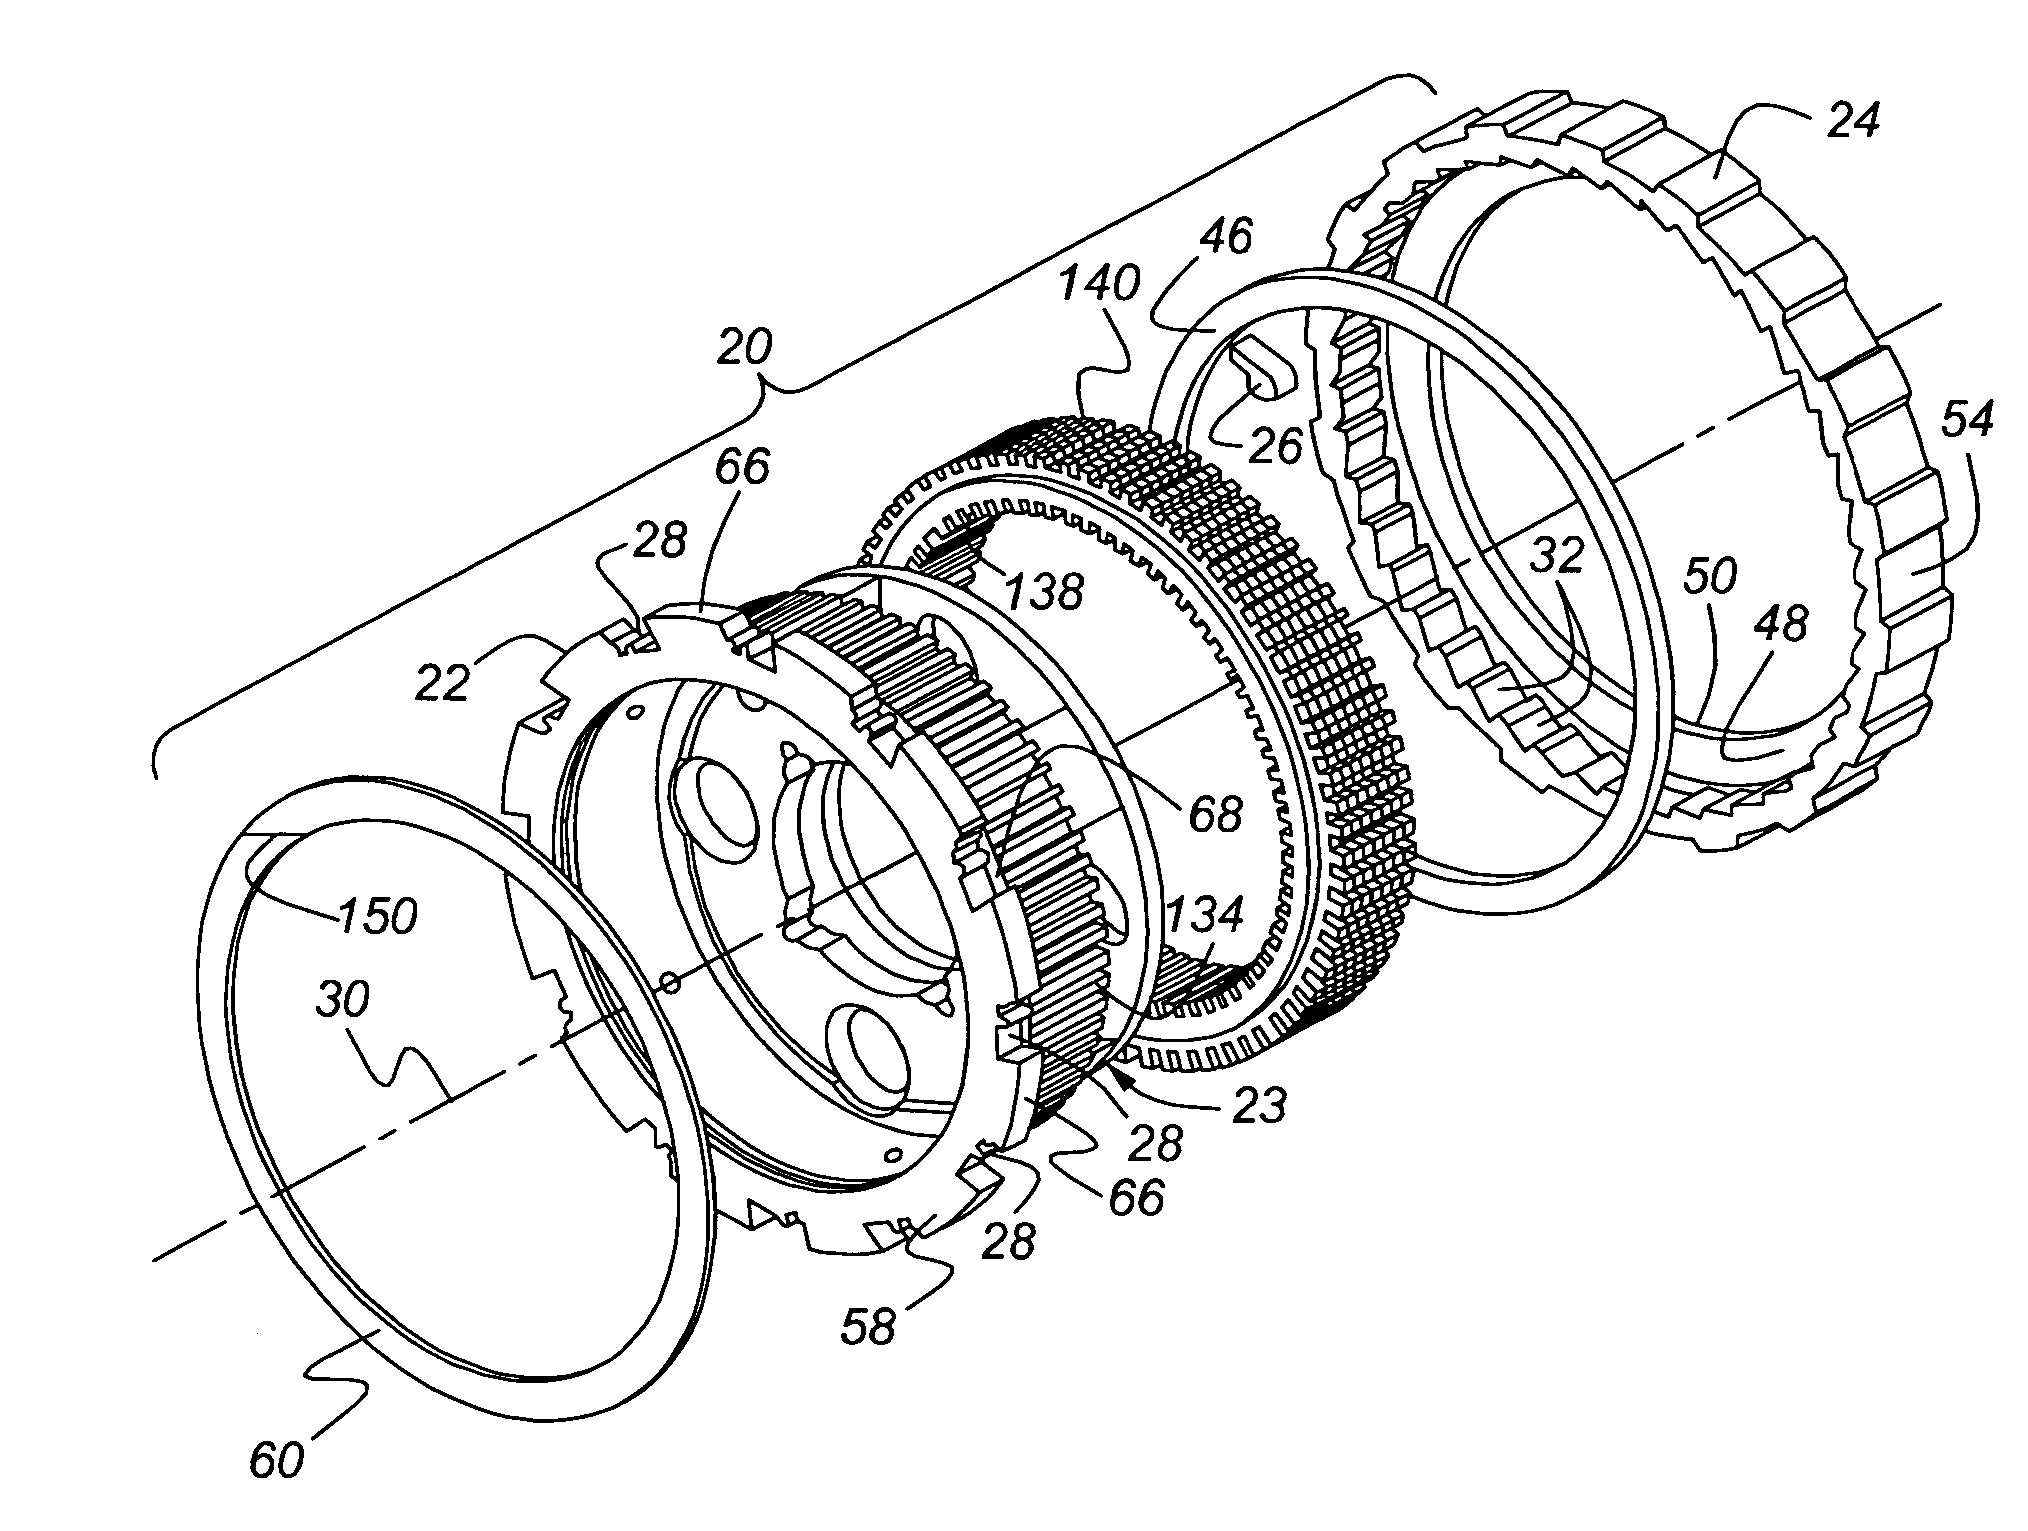 Automatic transmission carrier assembly including an overrunning brake